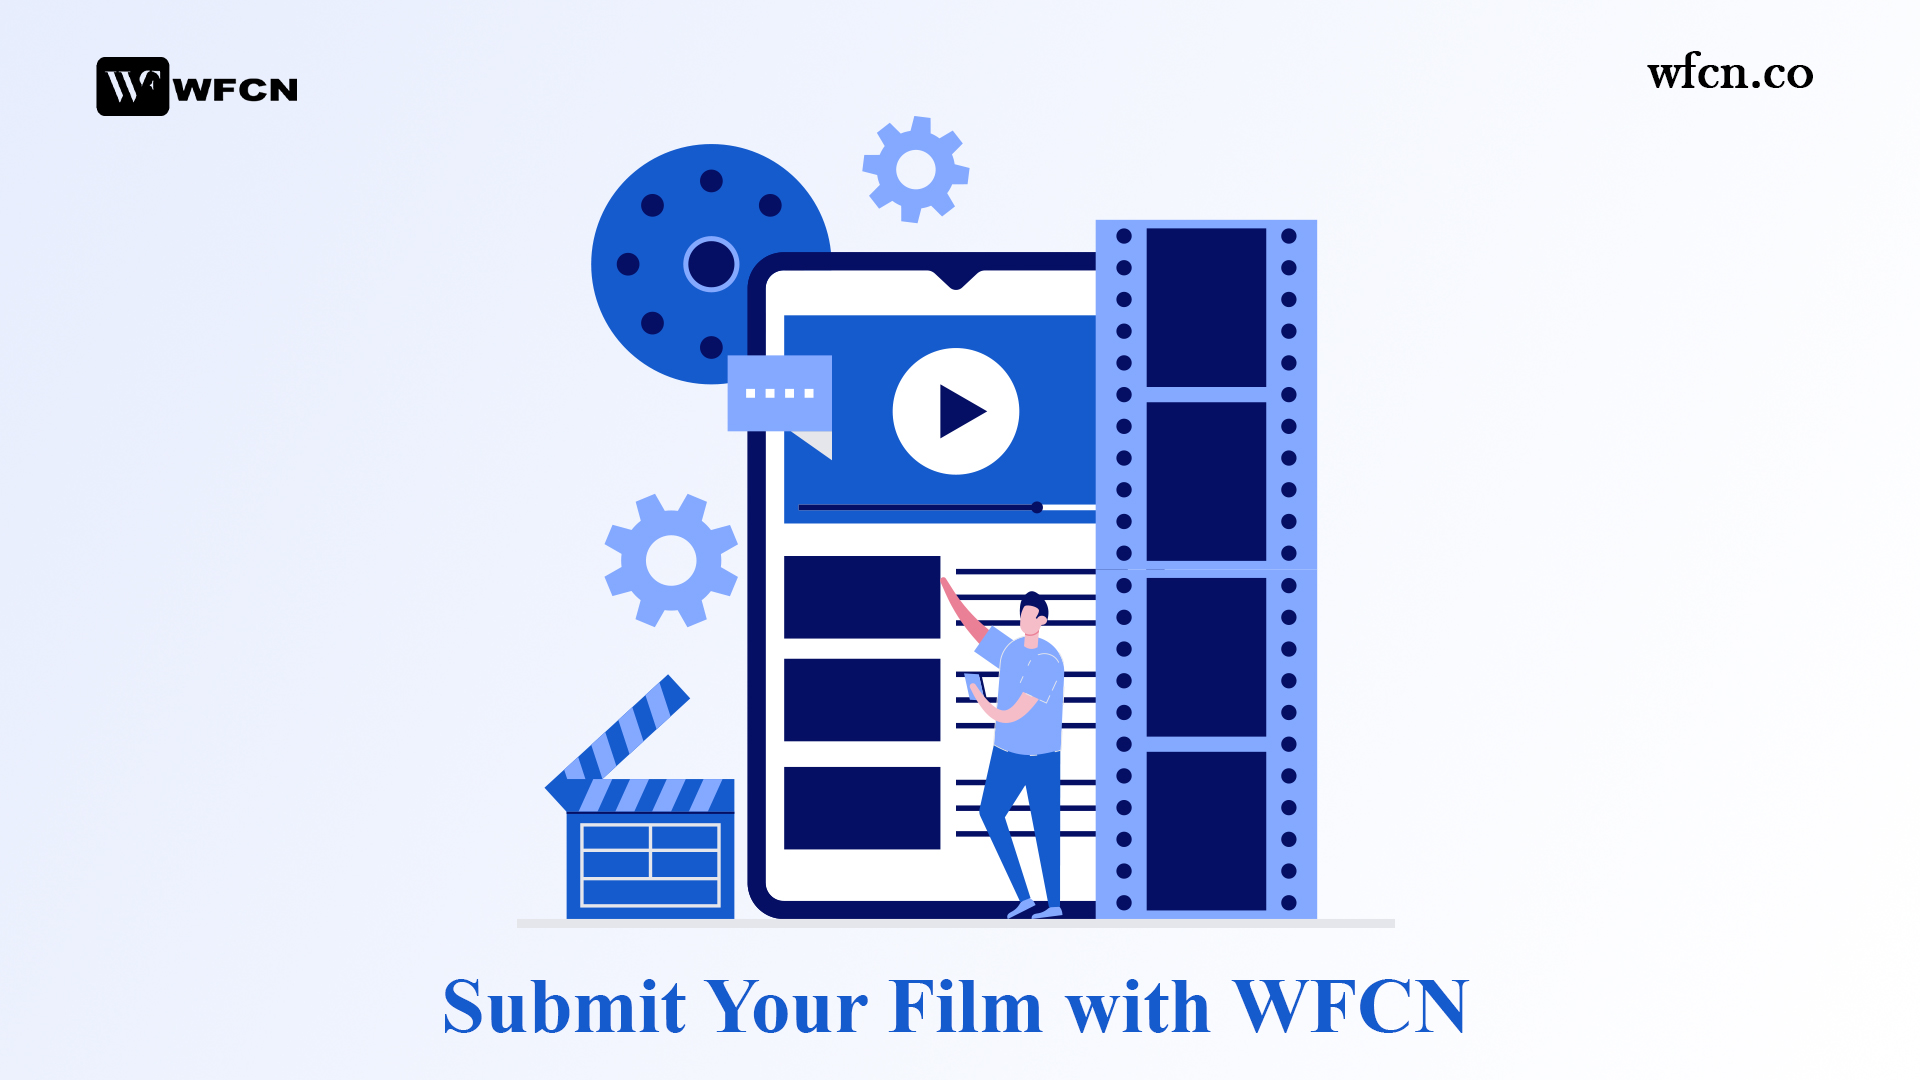 Submit Your Film with WFCN